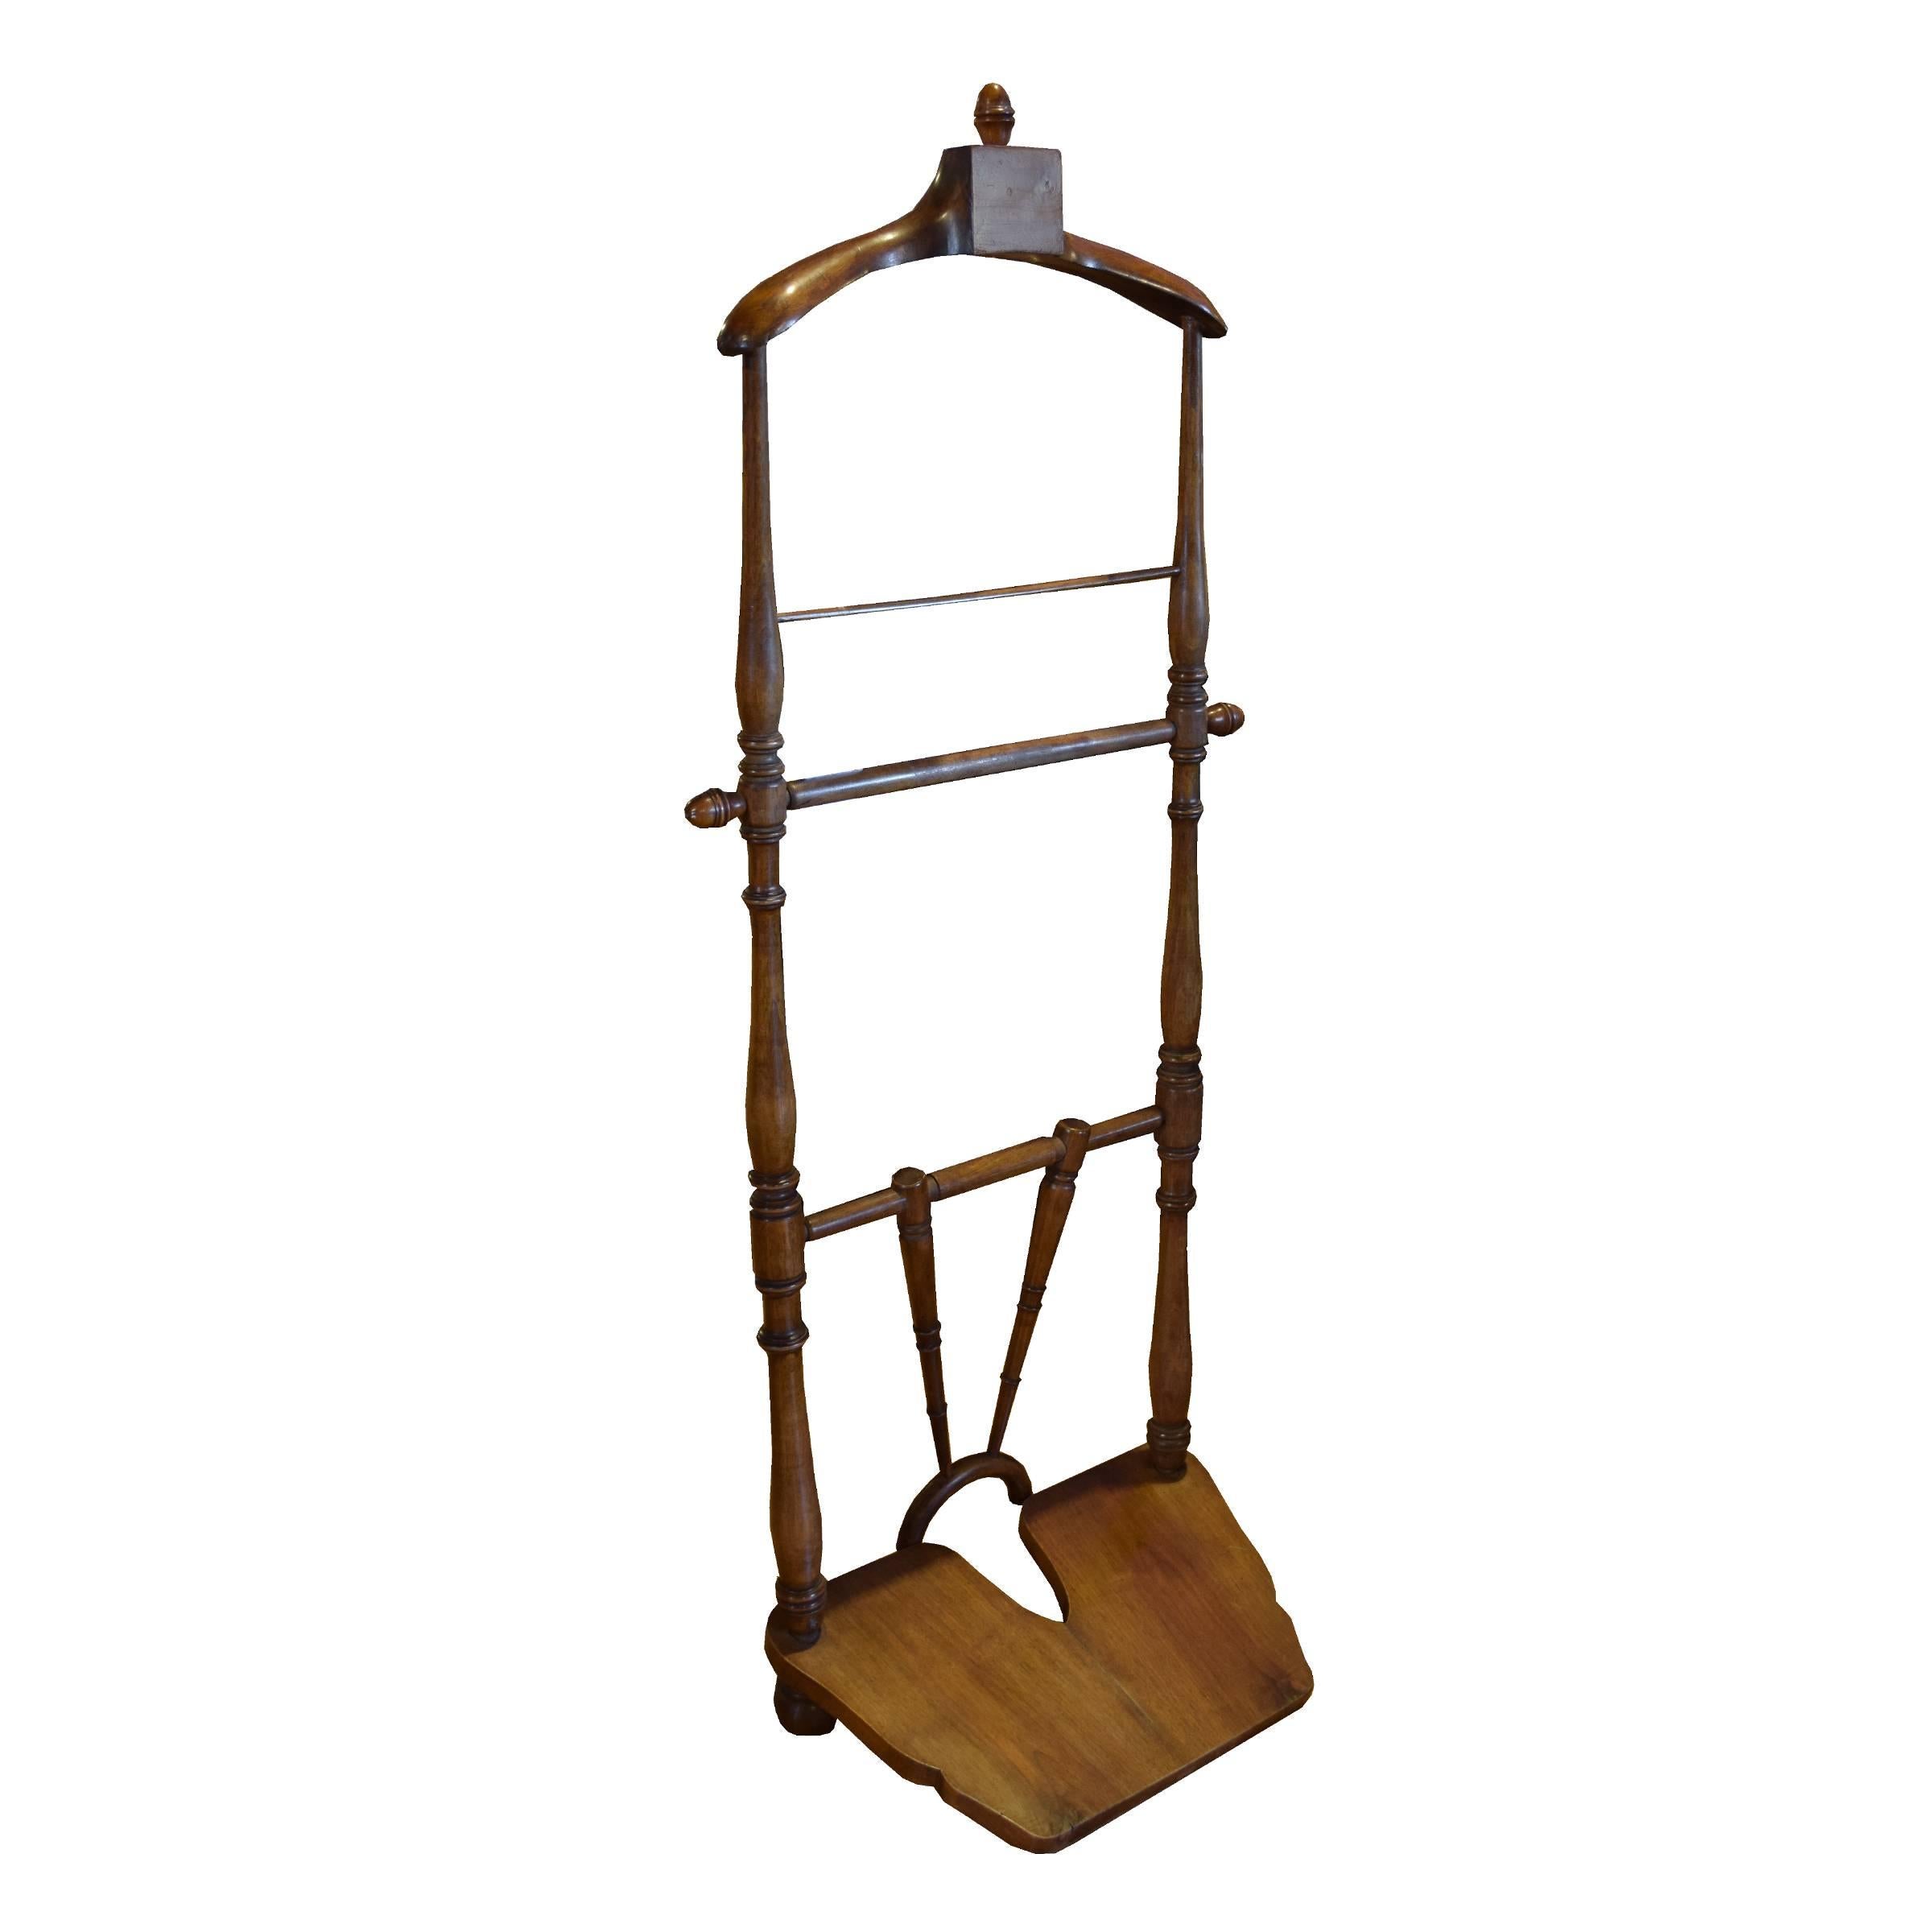 An Italian wood gentleman's valet stand with coat and pant hangers and a boot assist, circa 1920.
 